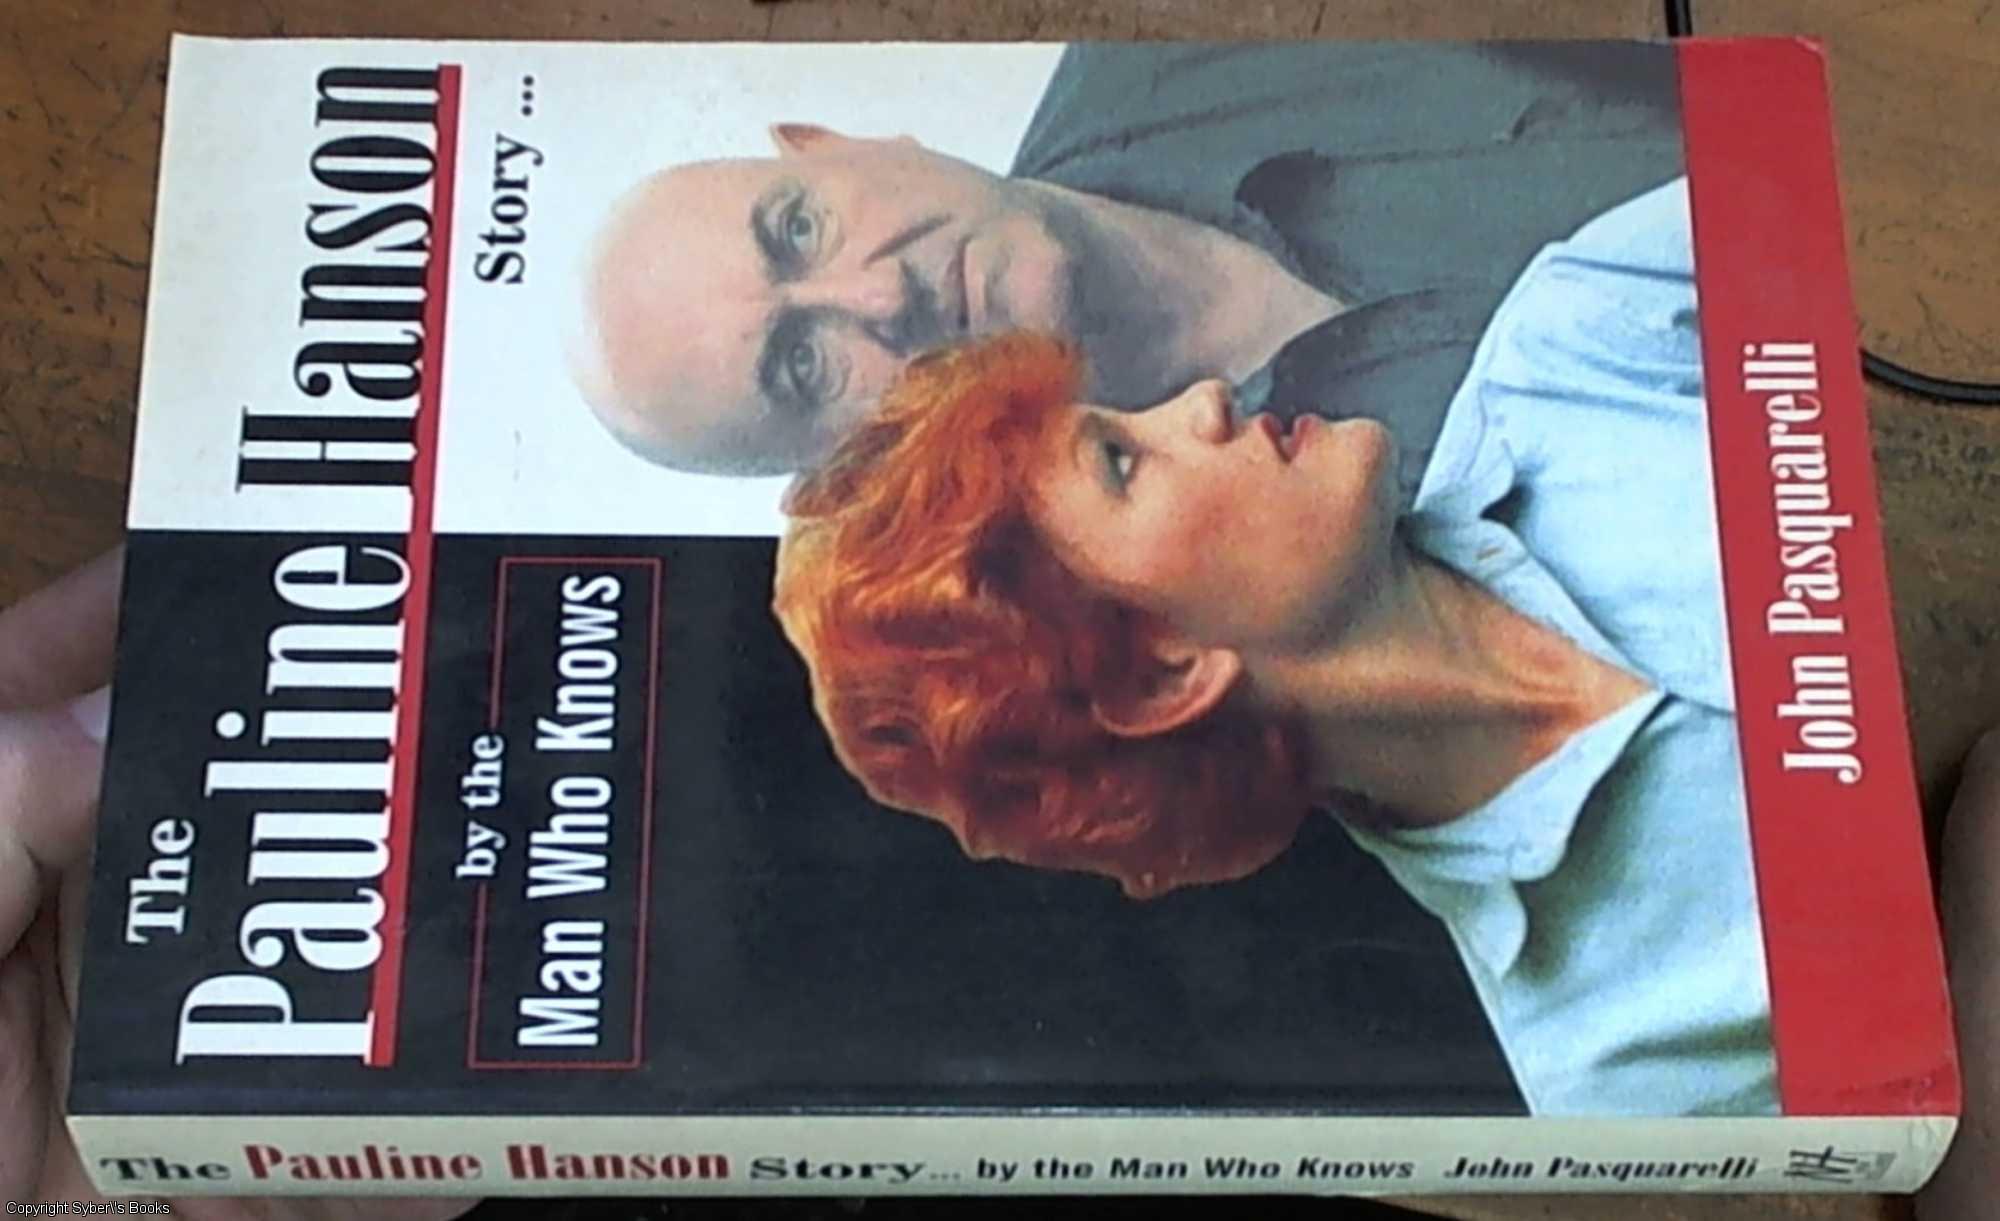 The Pauline Hanson Story . by the man who knows - Pasquarelli, John